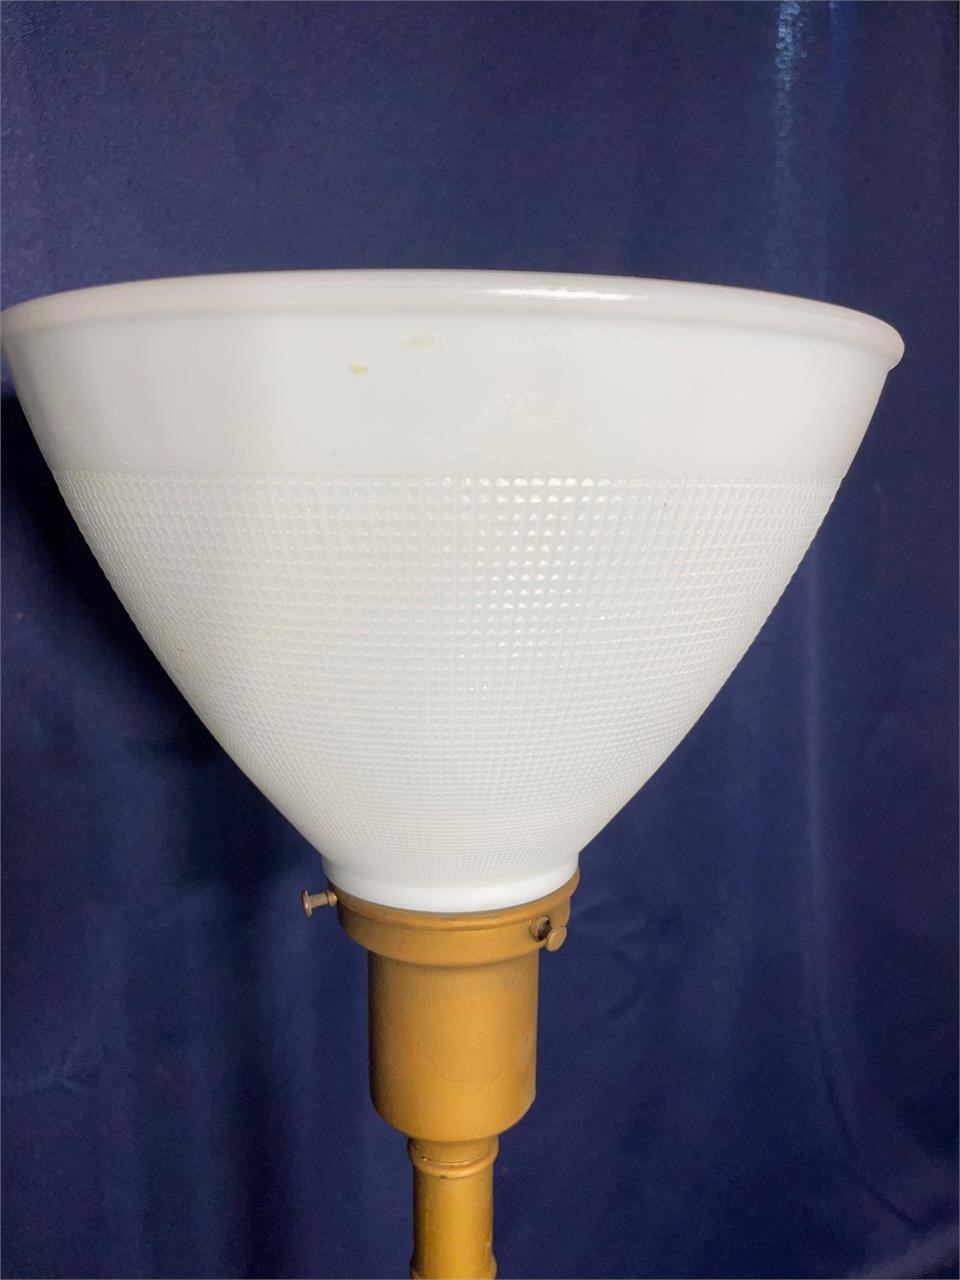 “The Miller” Lamp with Difuser Shade